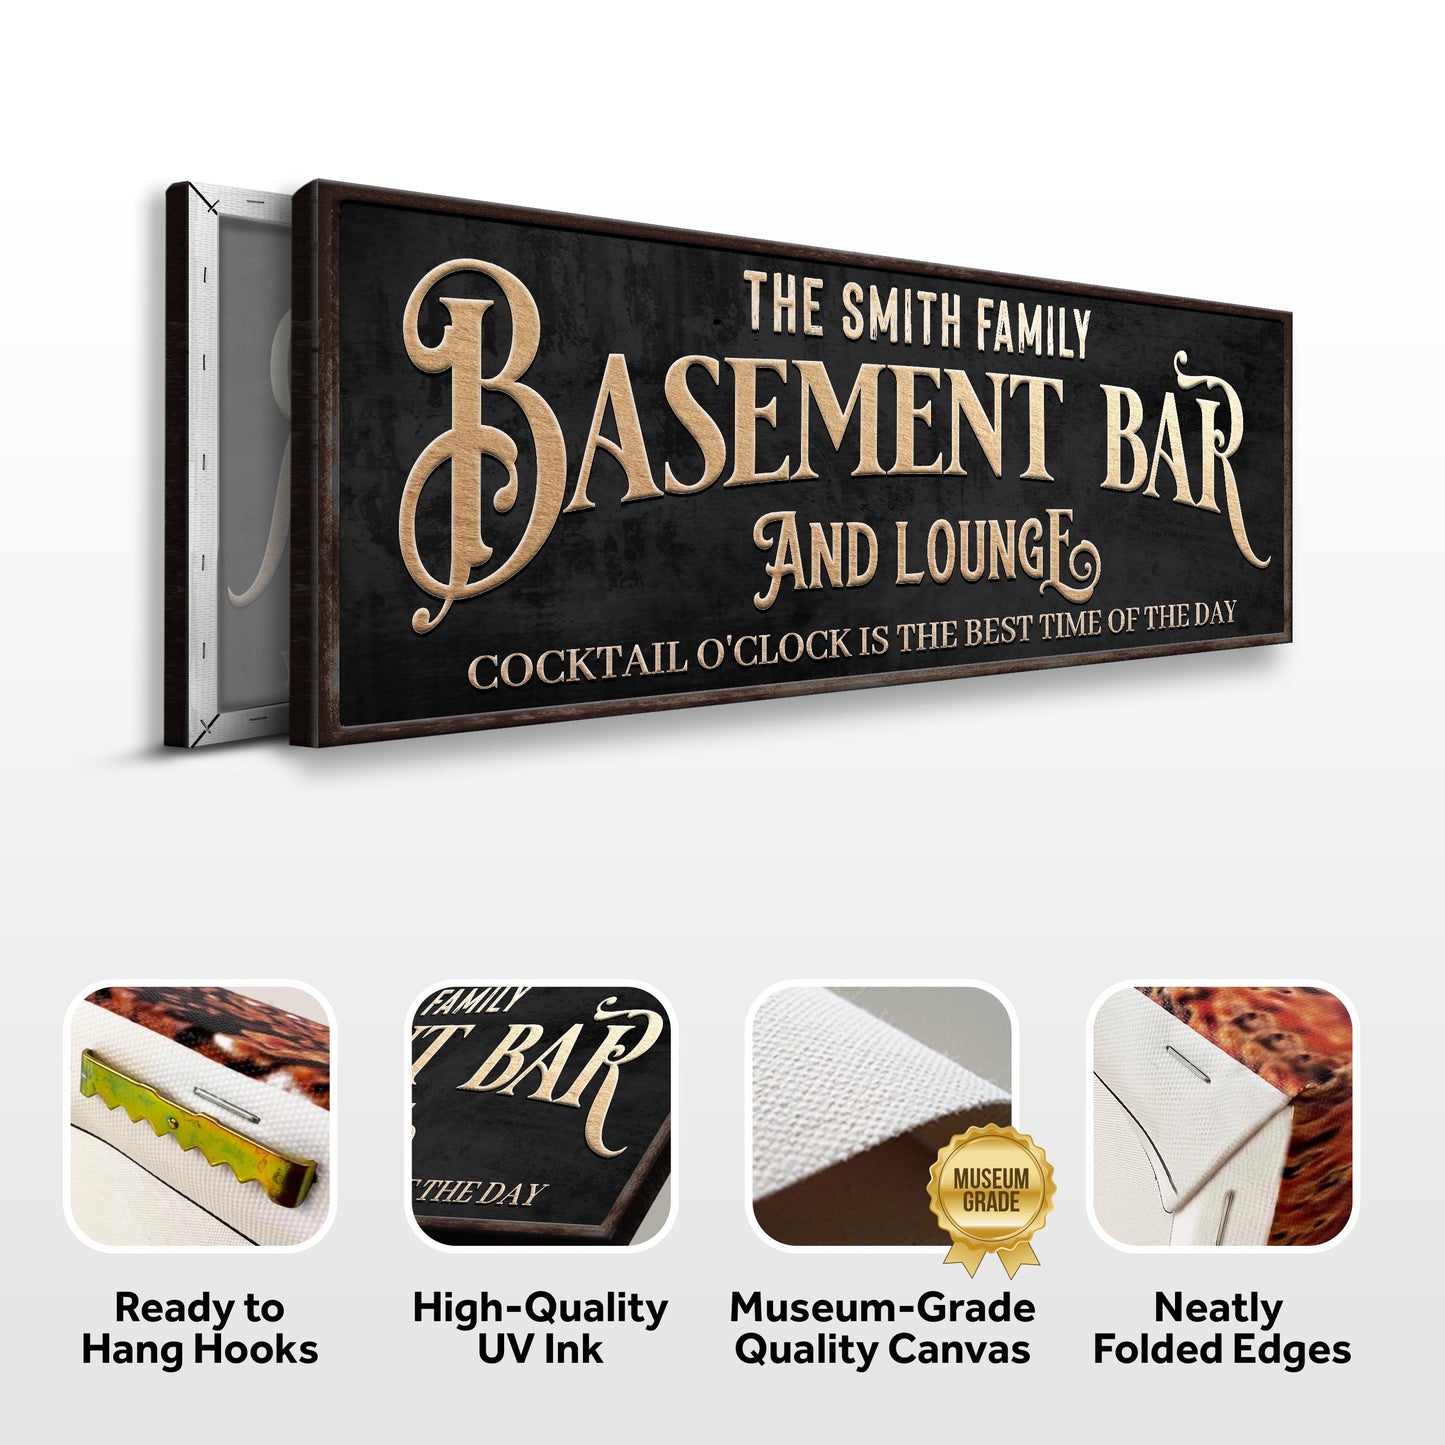 Custom Basement Bar and Lounge Sign Specs - Image by Tailored Canvases